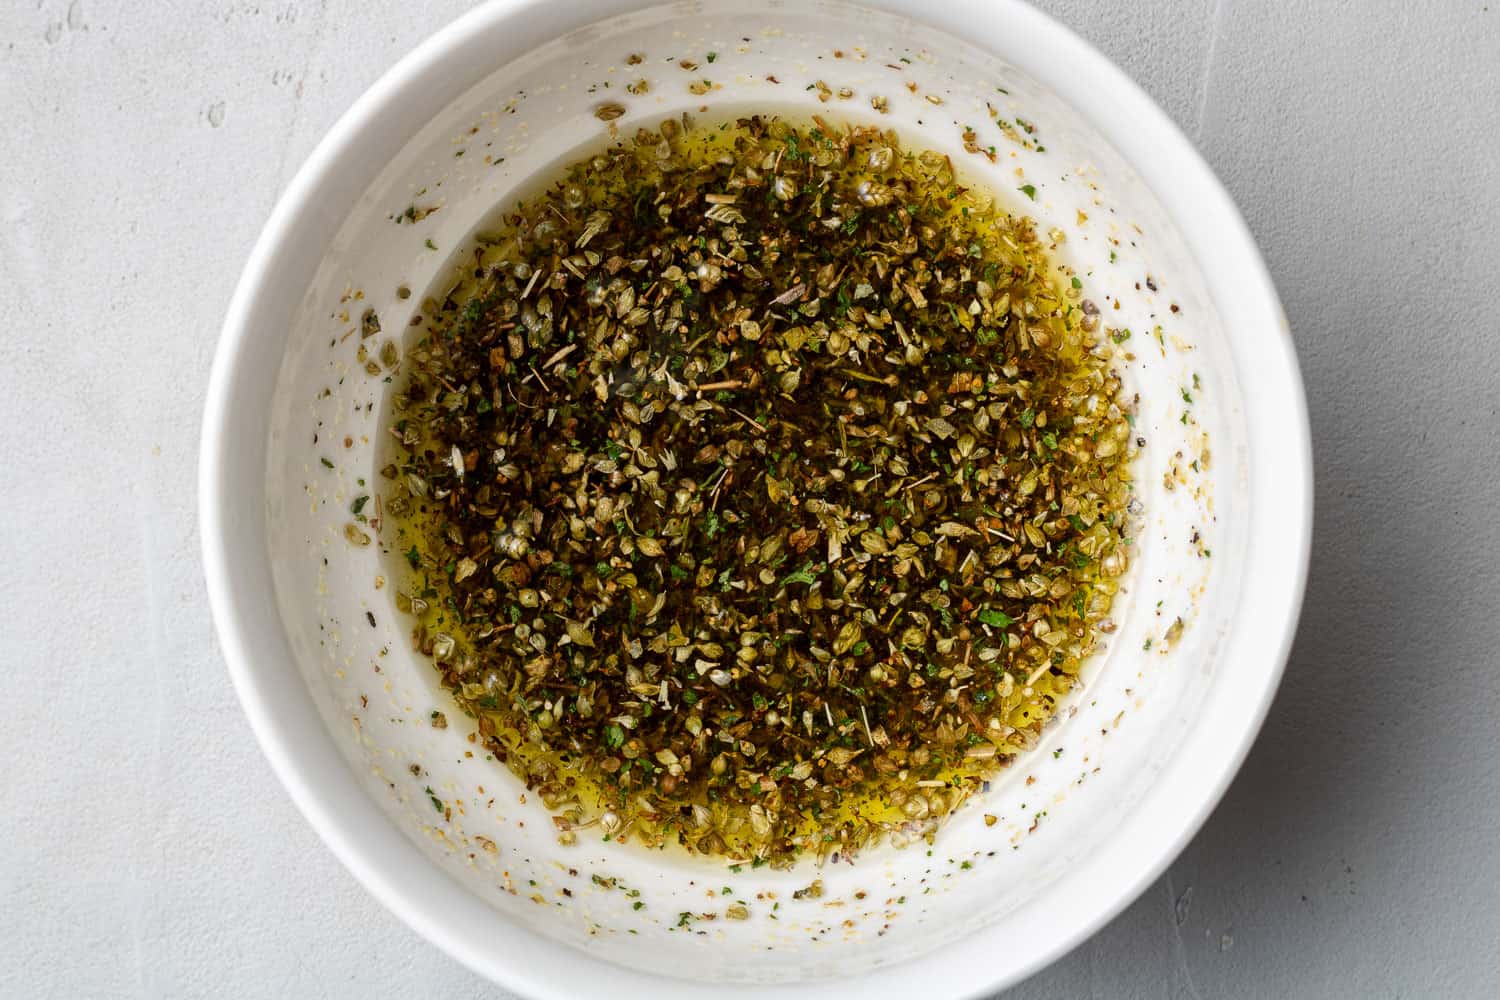 Olive oil and seasonings in a small white bowl.